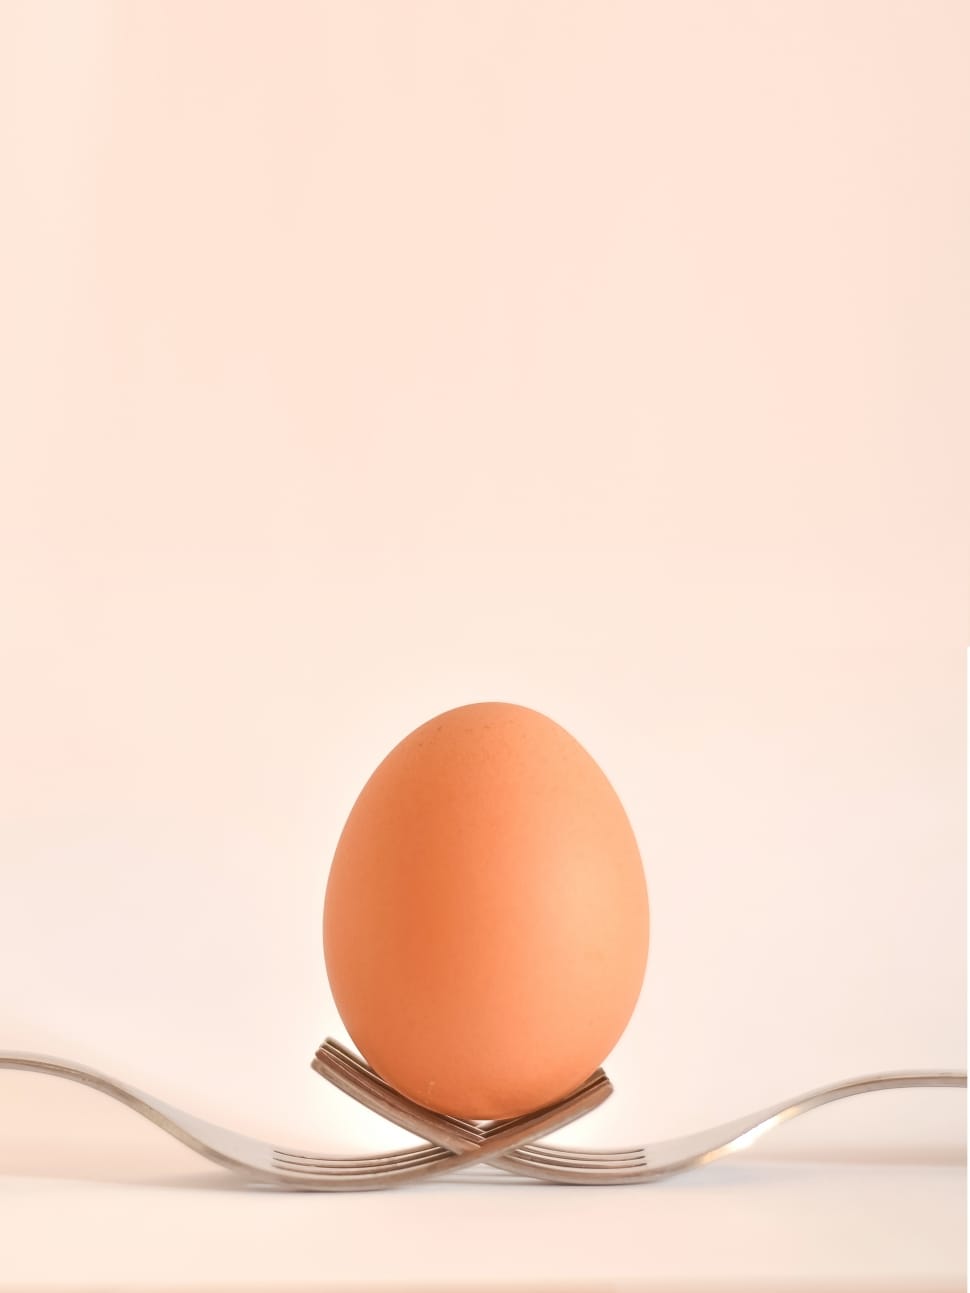 orange egg on top of two gray steel fork preview